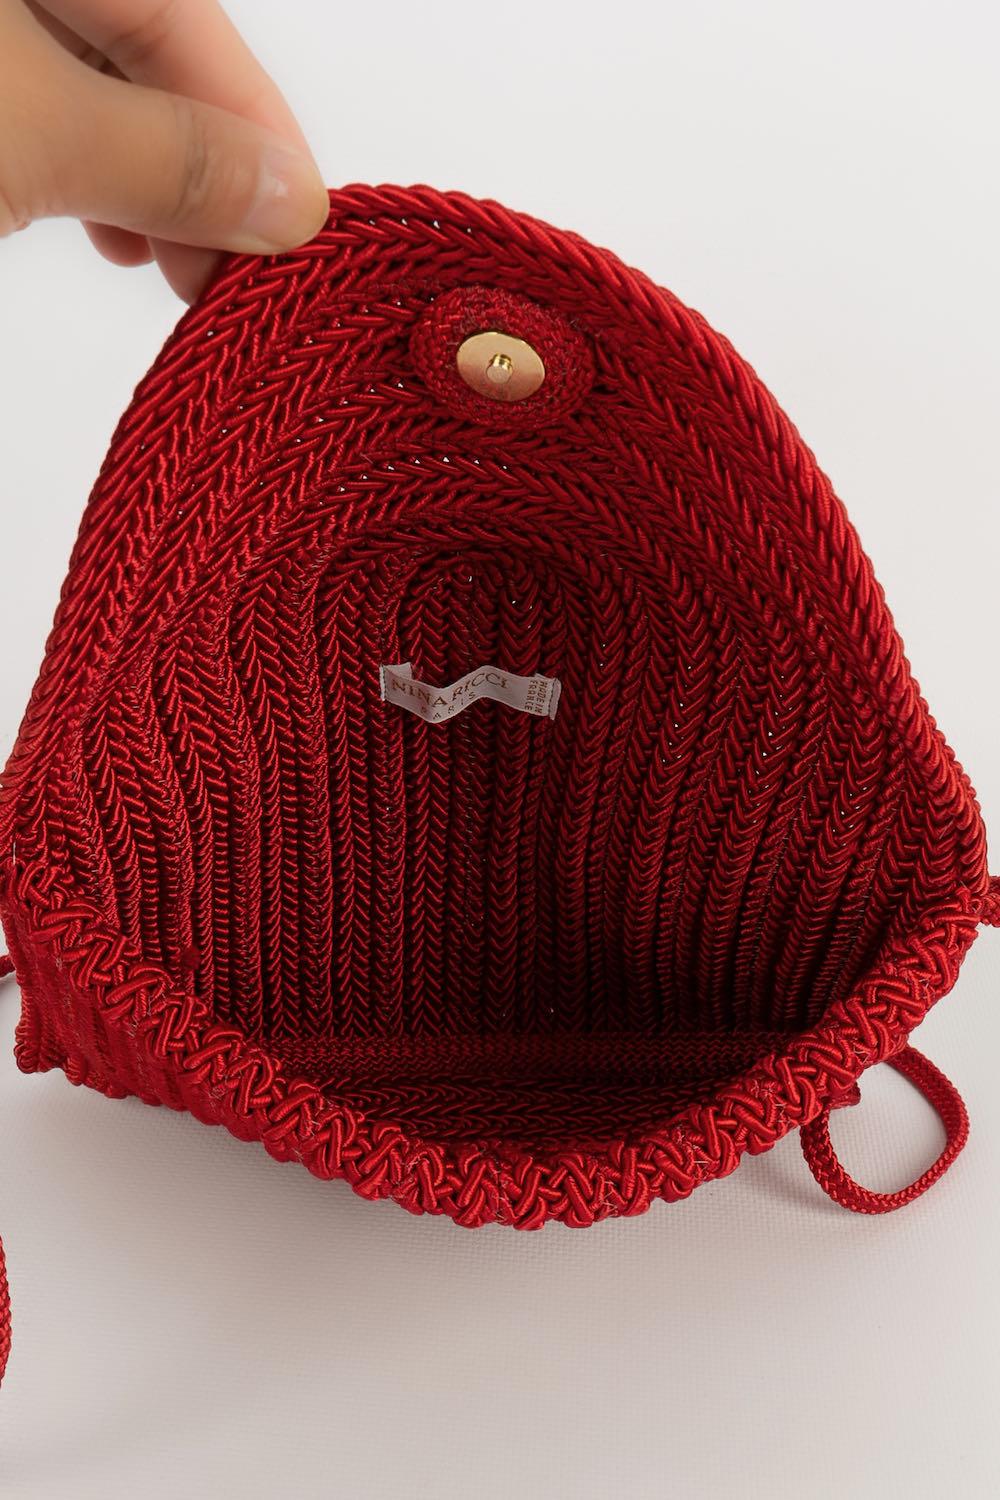 Nina Ricci Red Passementerie Bag For Sale 1